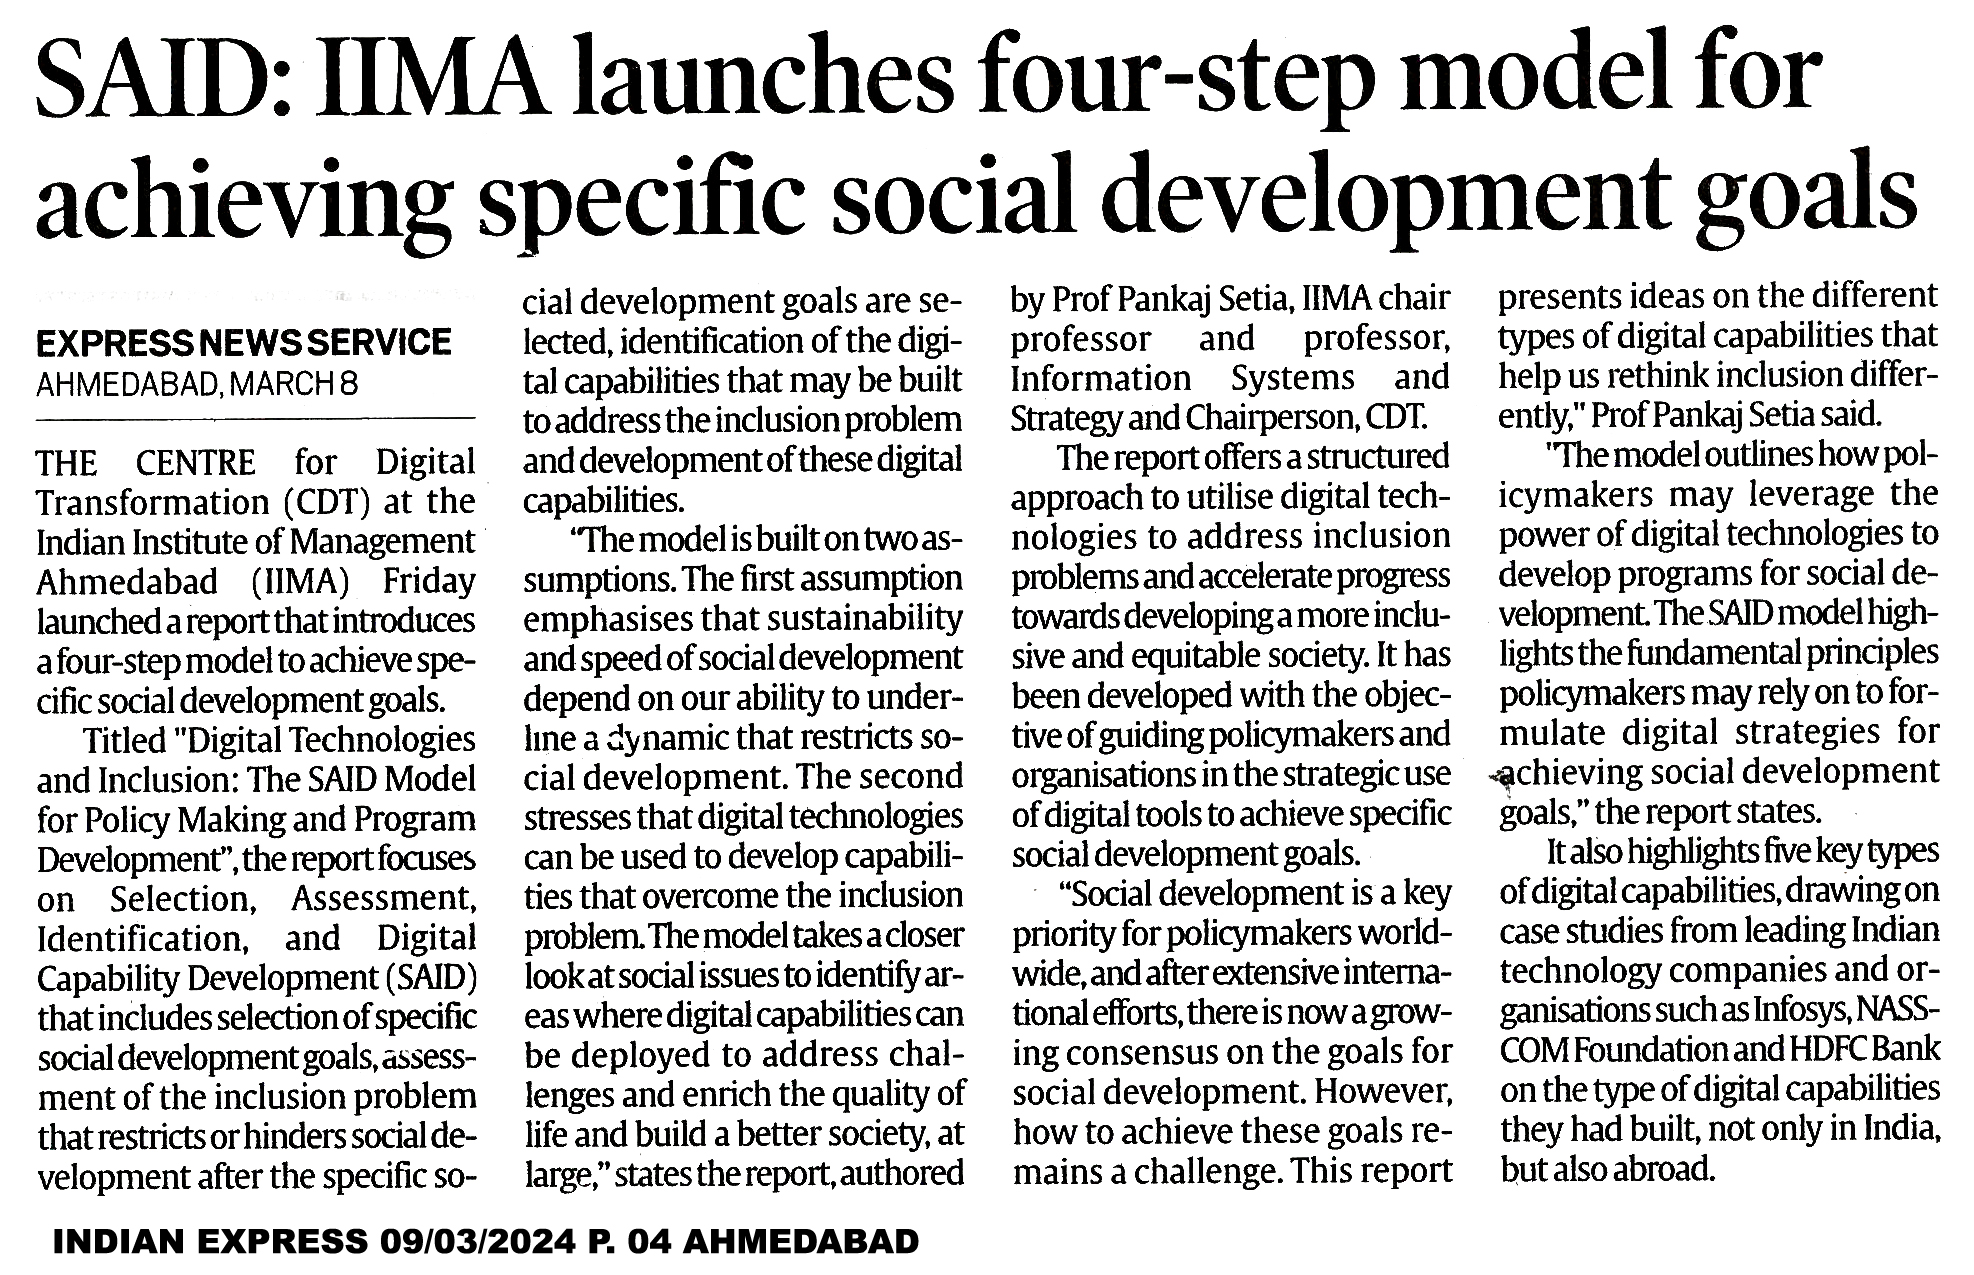 IIMA introduces 4-step model for specific social development goals